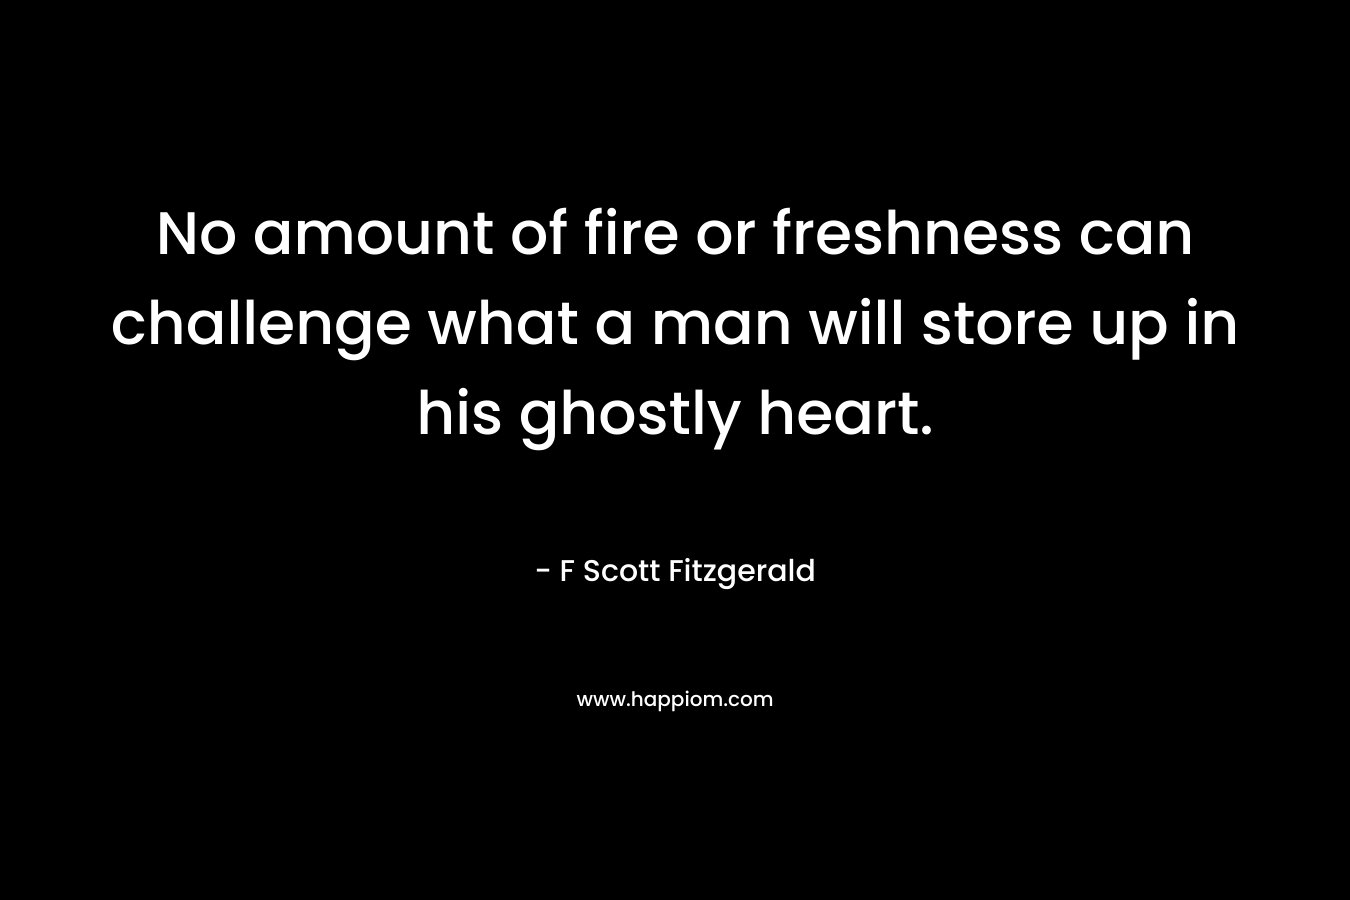 No amount of fire or freshness can challenge what a man will store up in his ghostly heart. – F Scott Fitzgerald